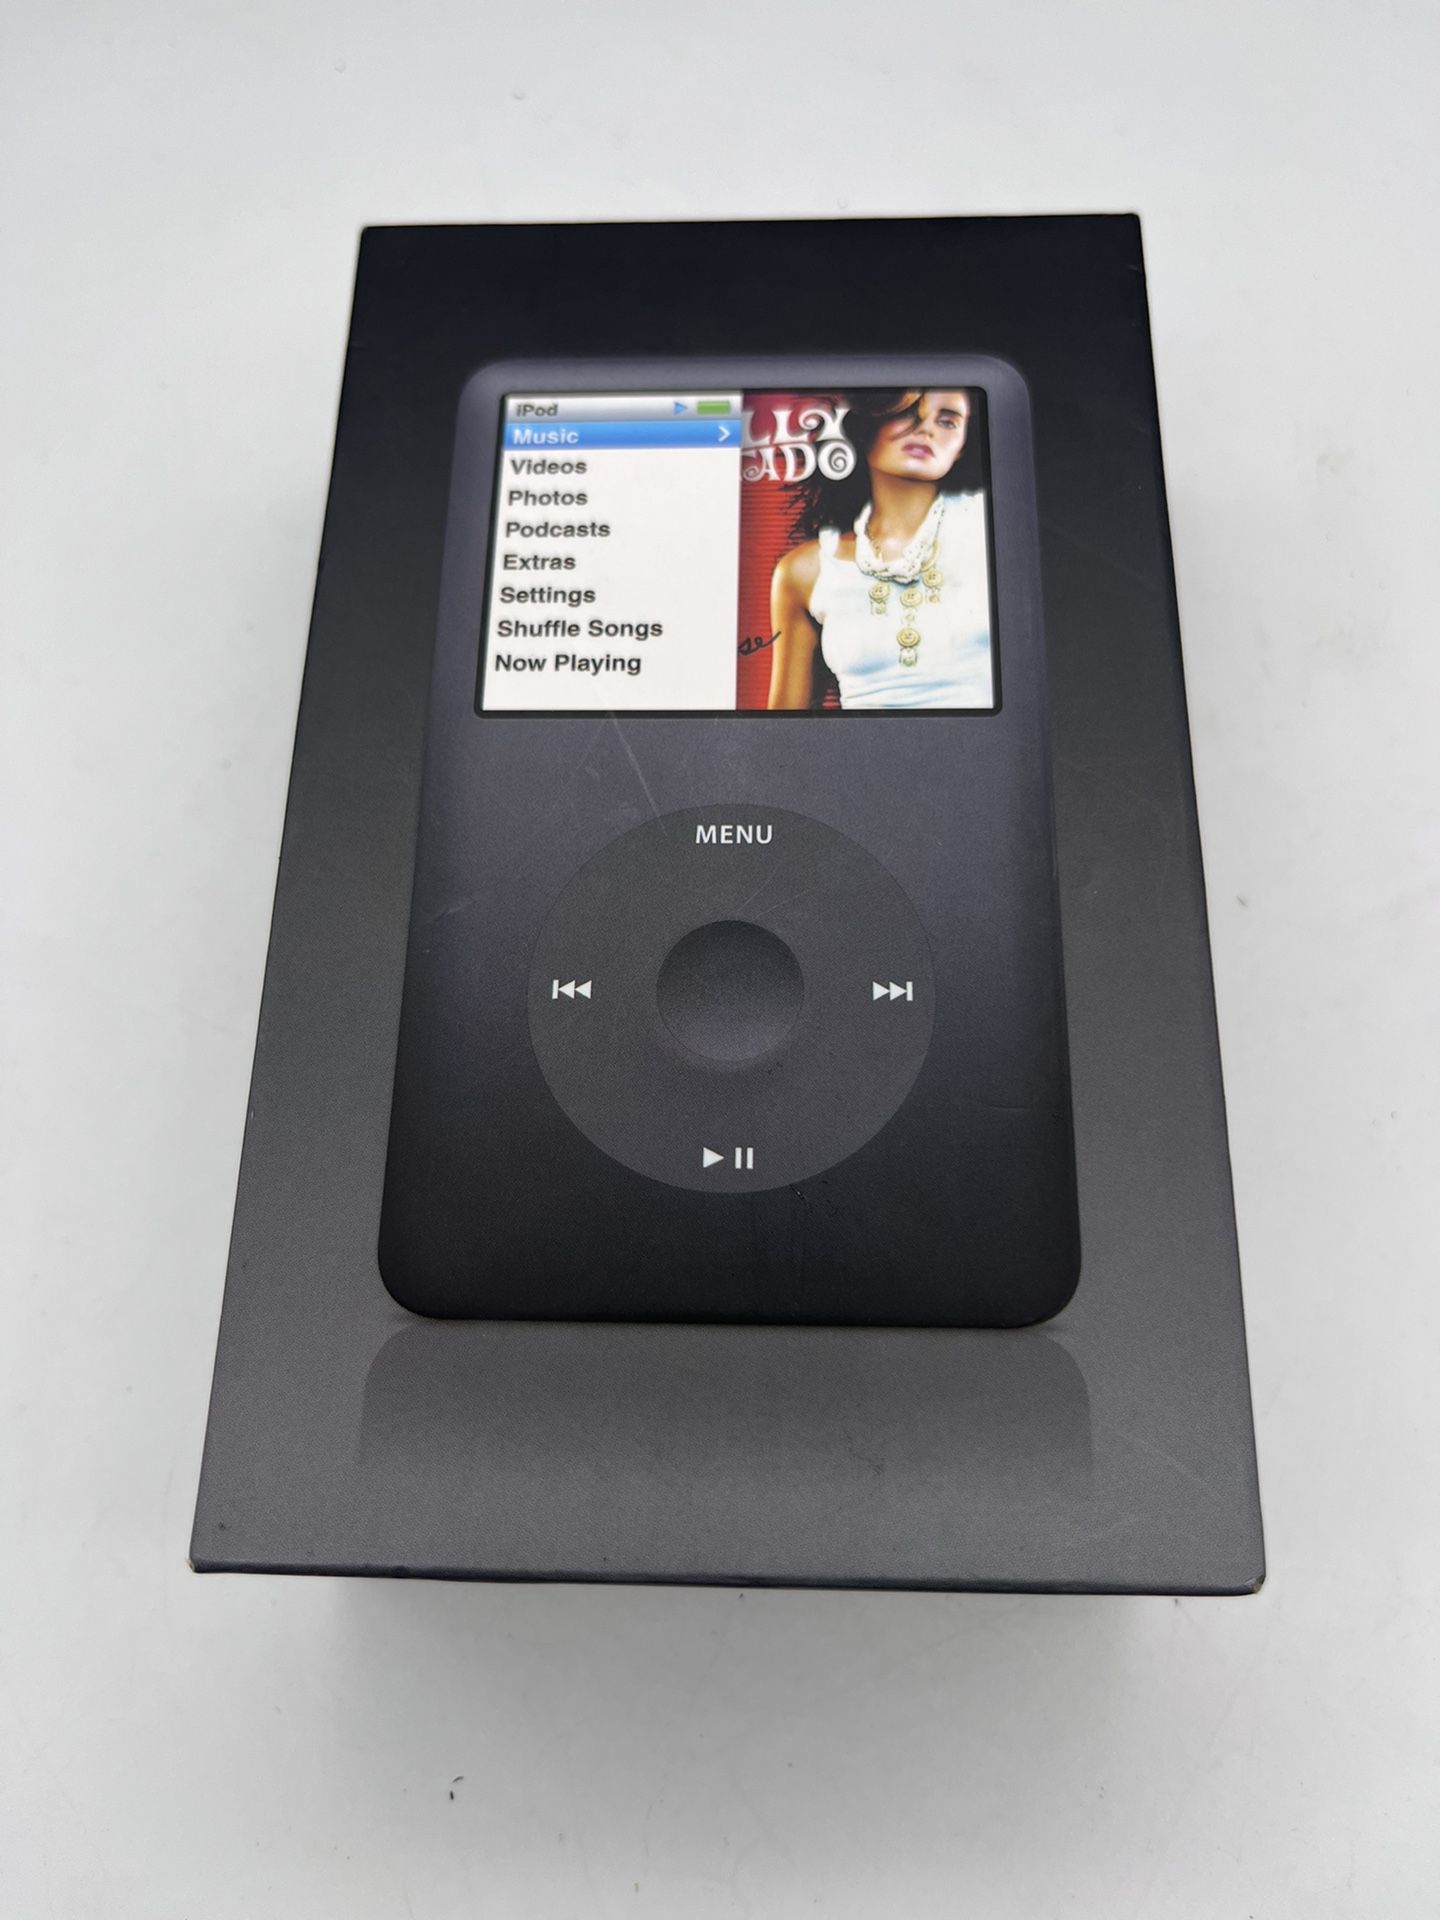 Apple iPod Classic 6th Gen 80GB(A1238) for Sale in Katy, TX